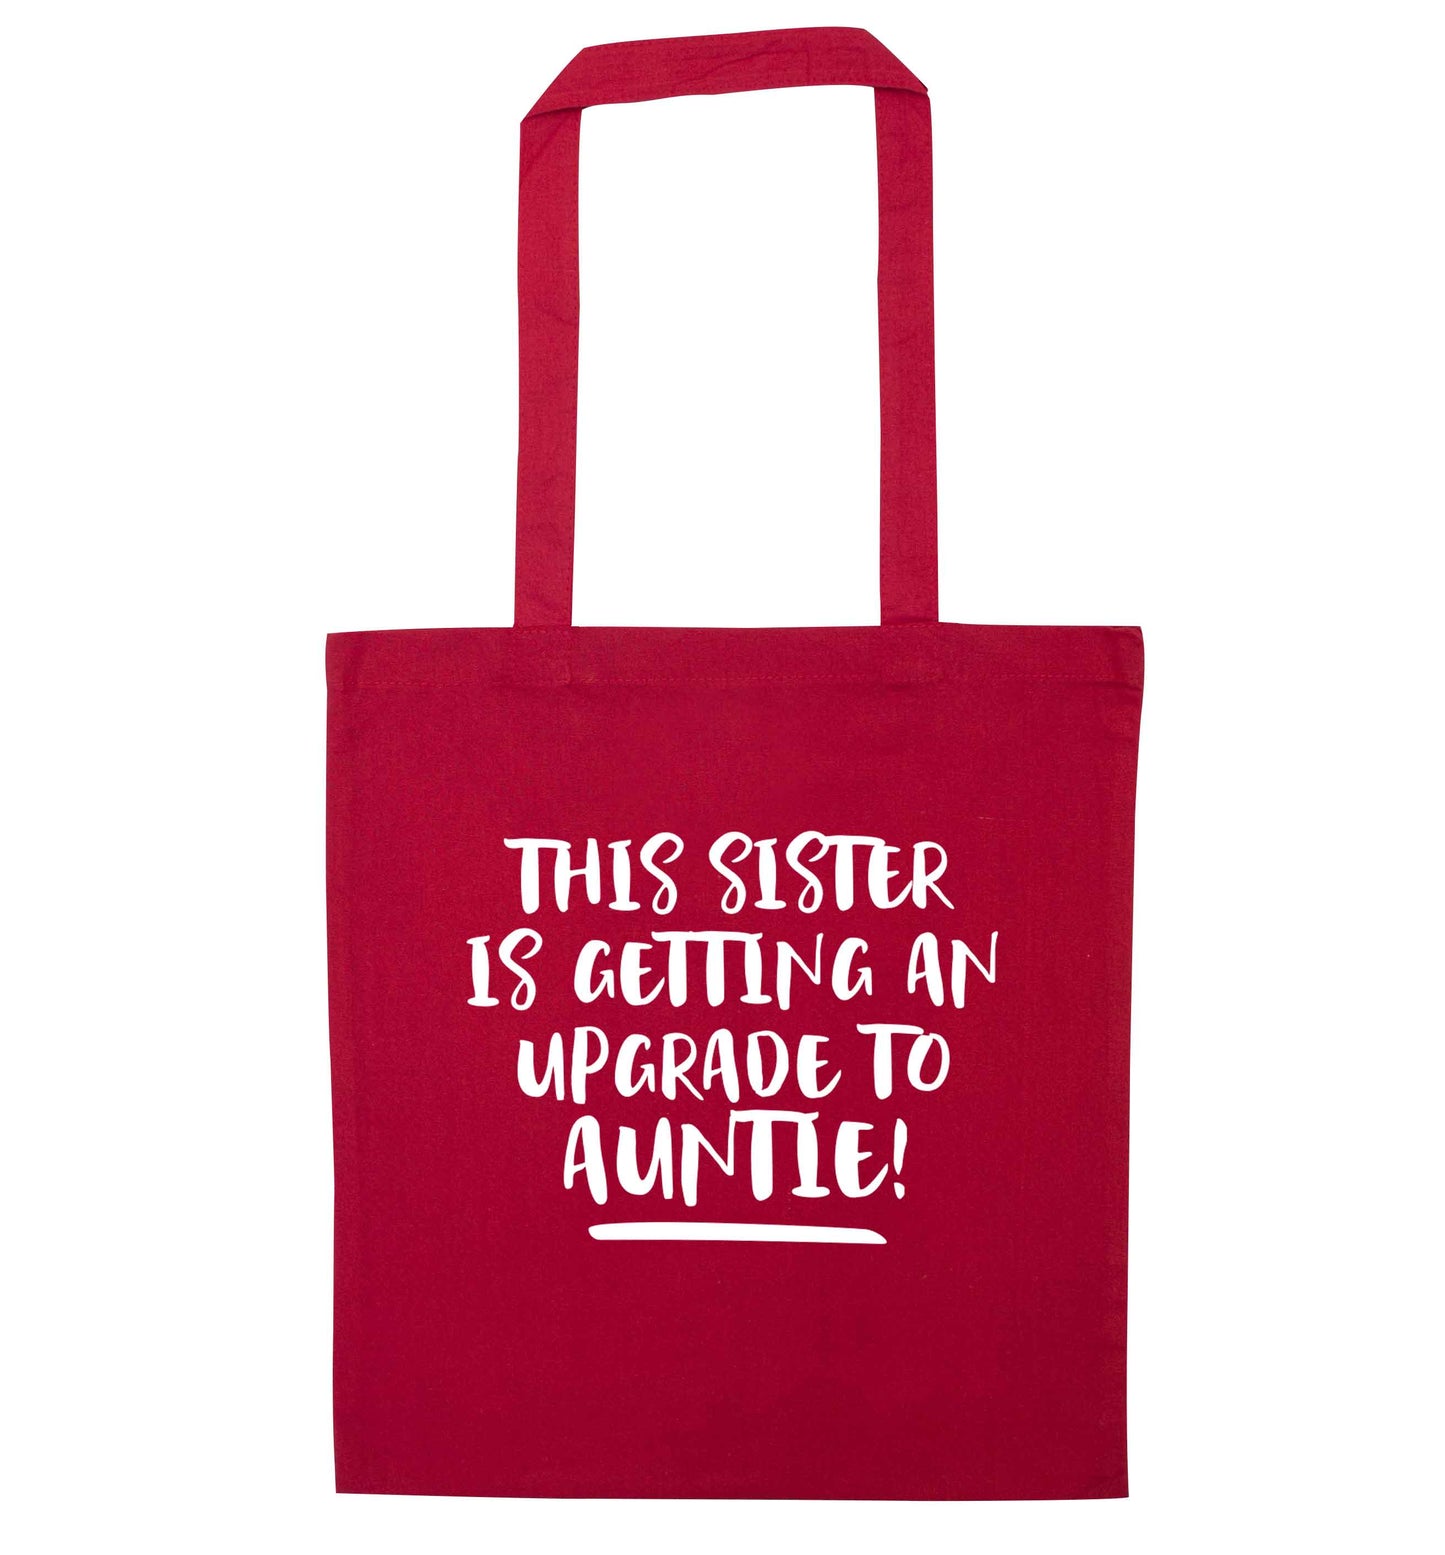 This sister is getting an upgrade to auntie! red tote bag